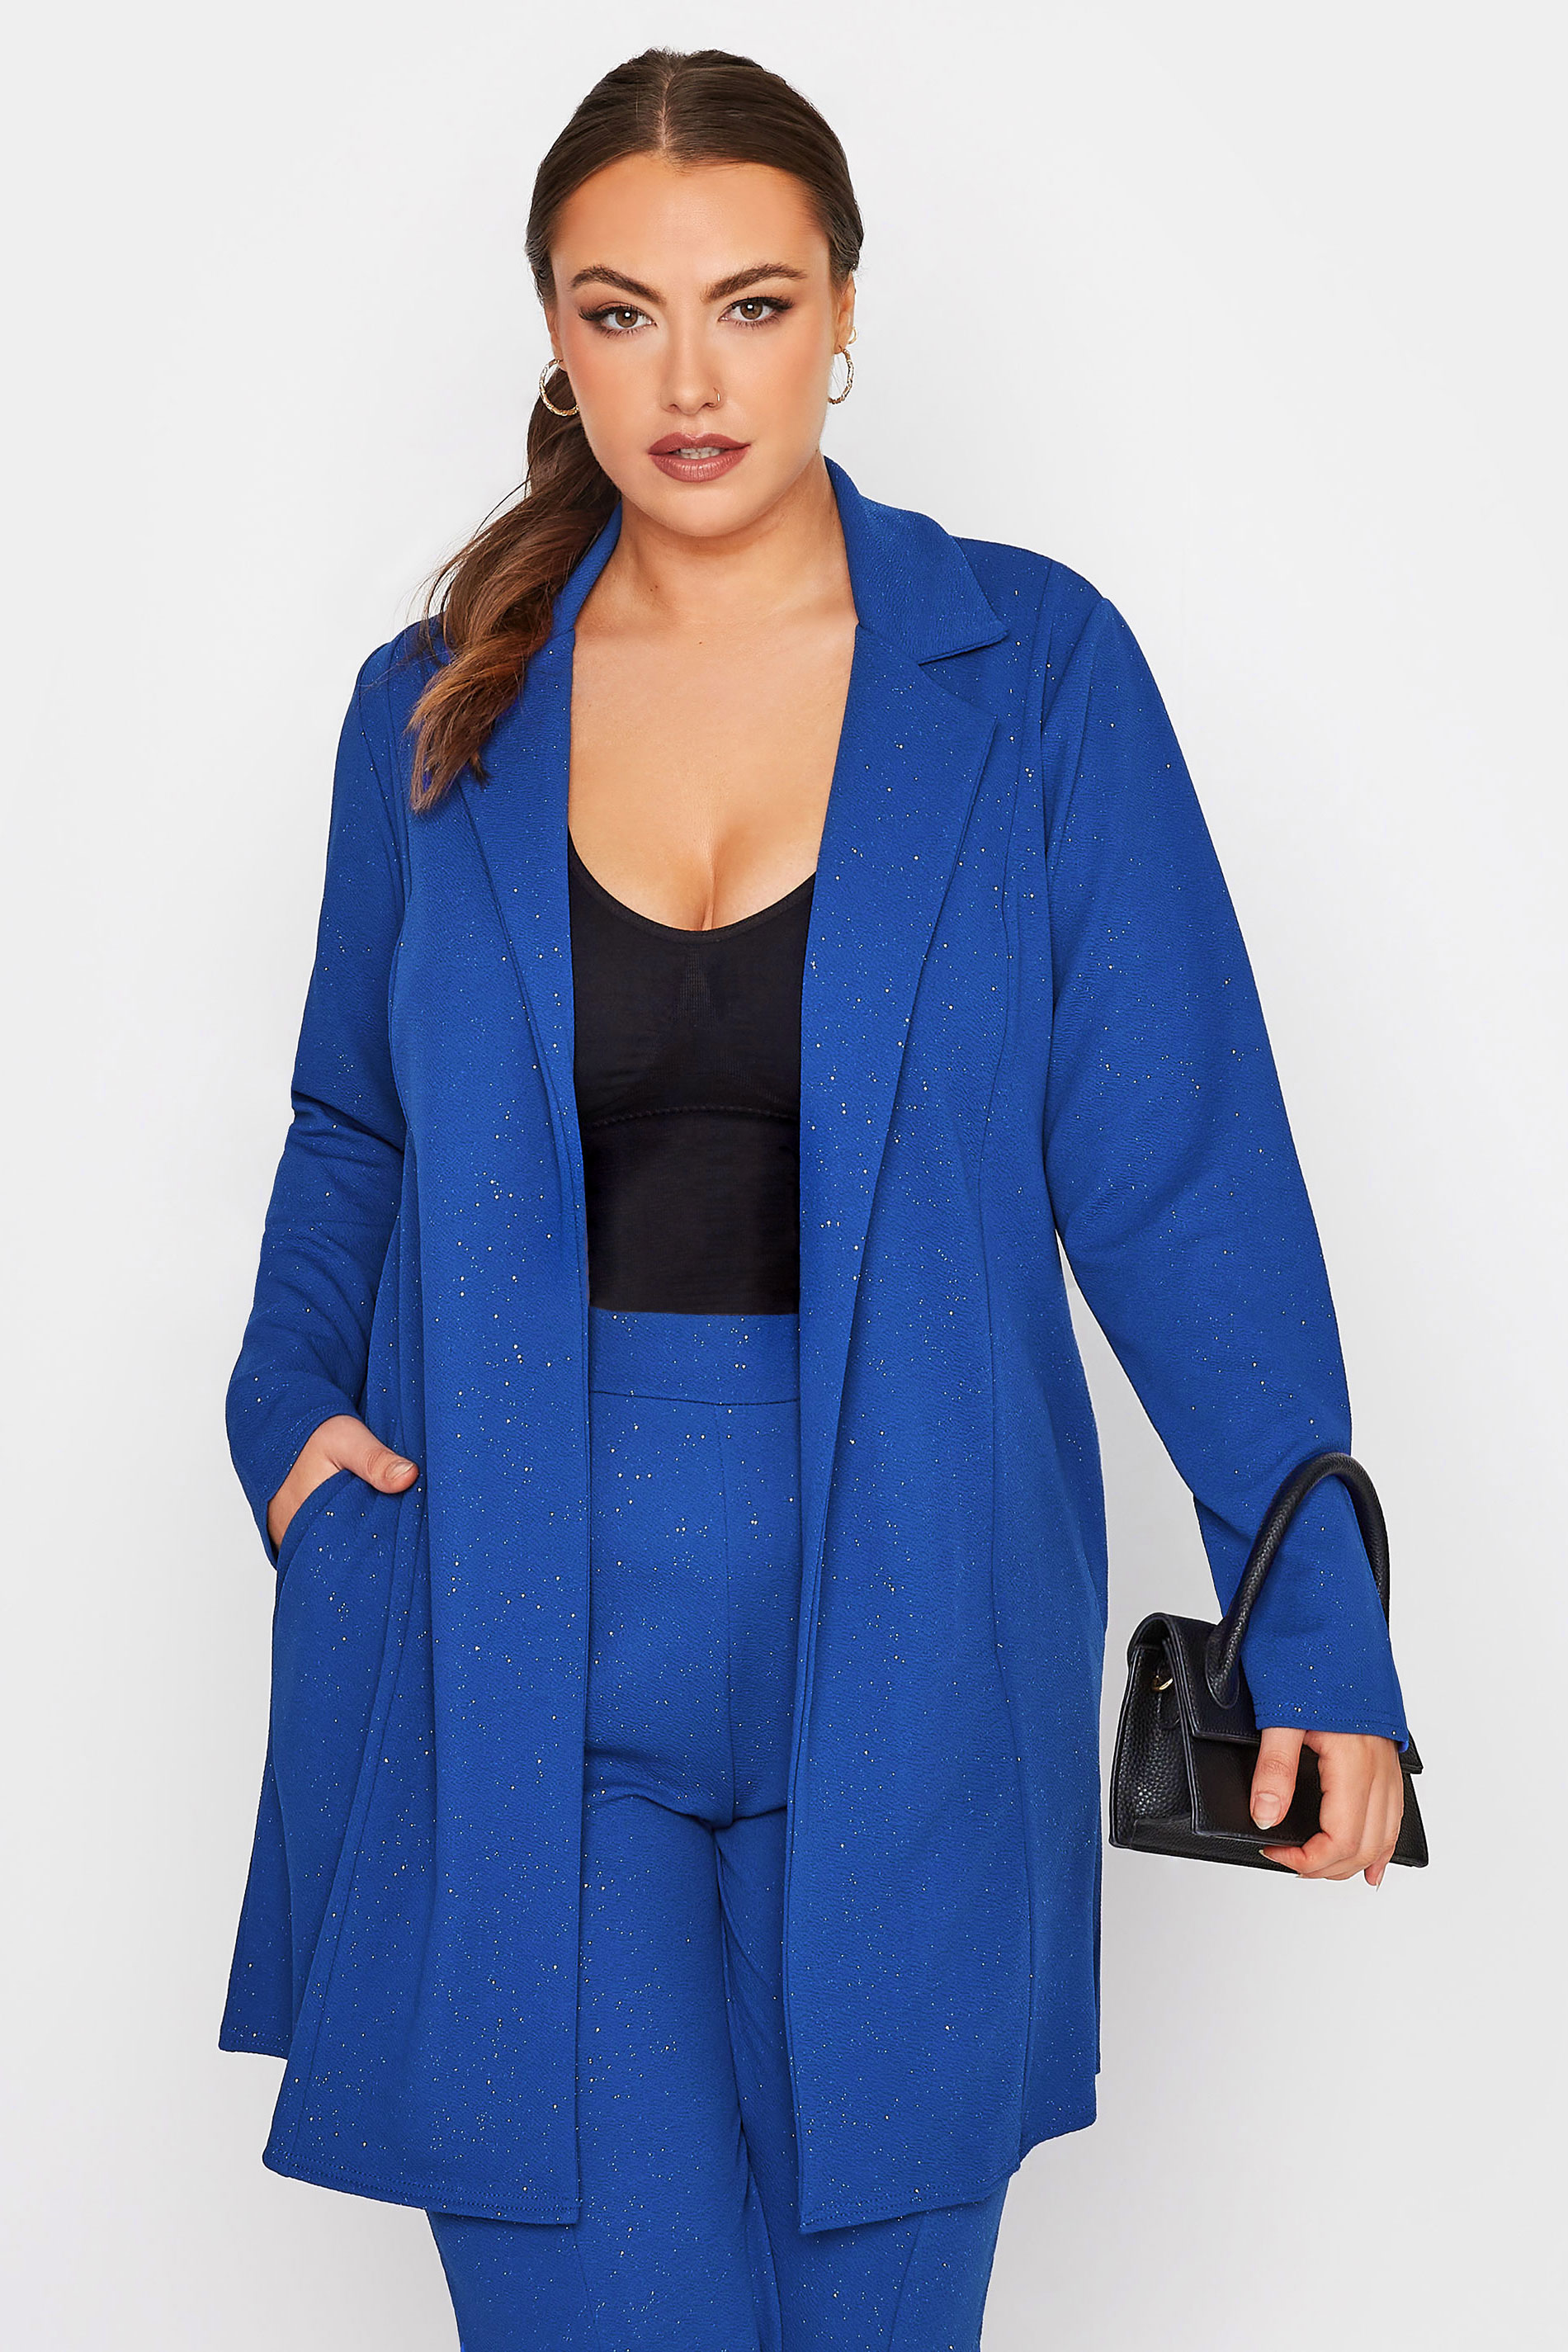 LIMITED COLLECTION Plus Size Cobalt Blue Glitter Longline Blazer | Yours Clothing 1